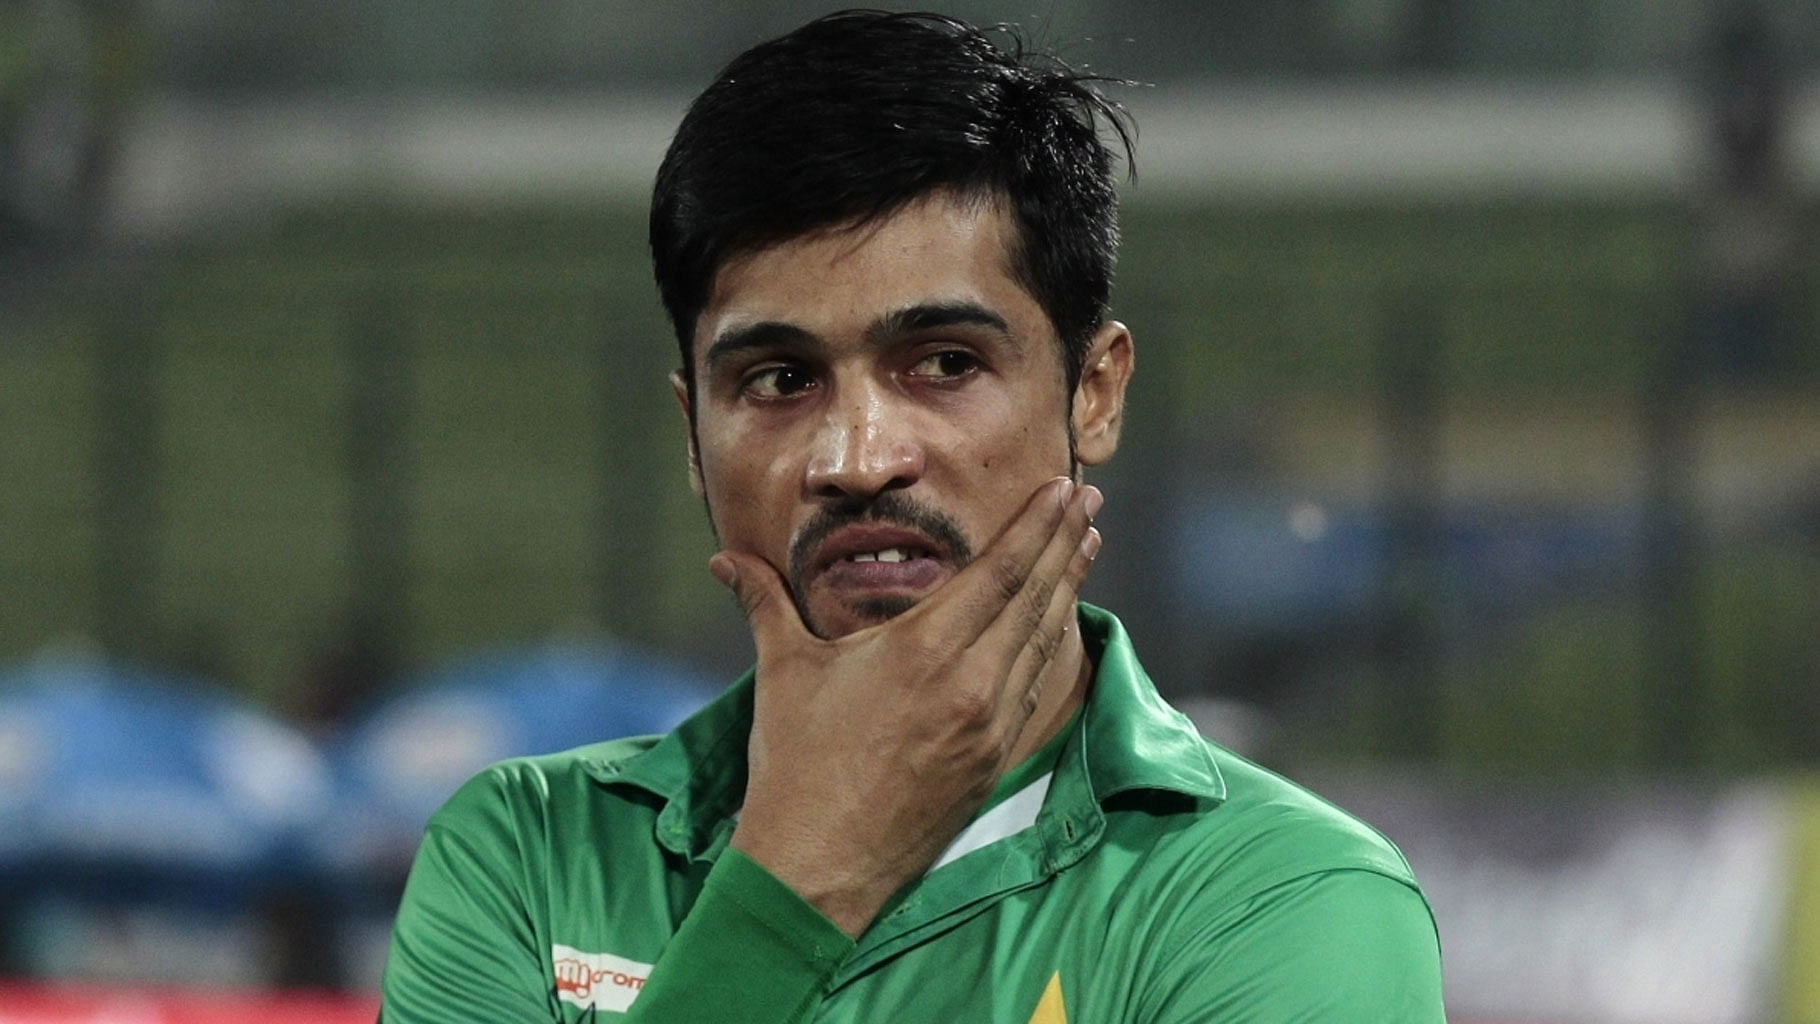 Pakistan pacer Mohammad Amir has left the WhatsApp group created by the Pakistan Cricket Board.